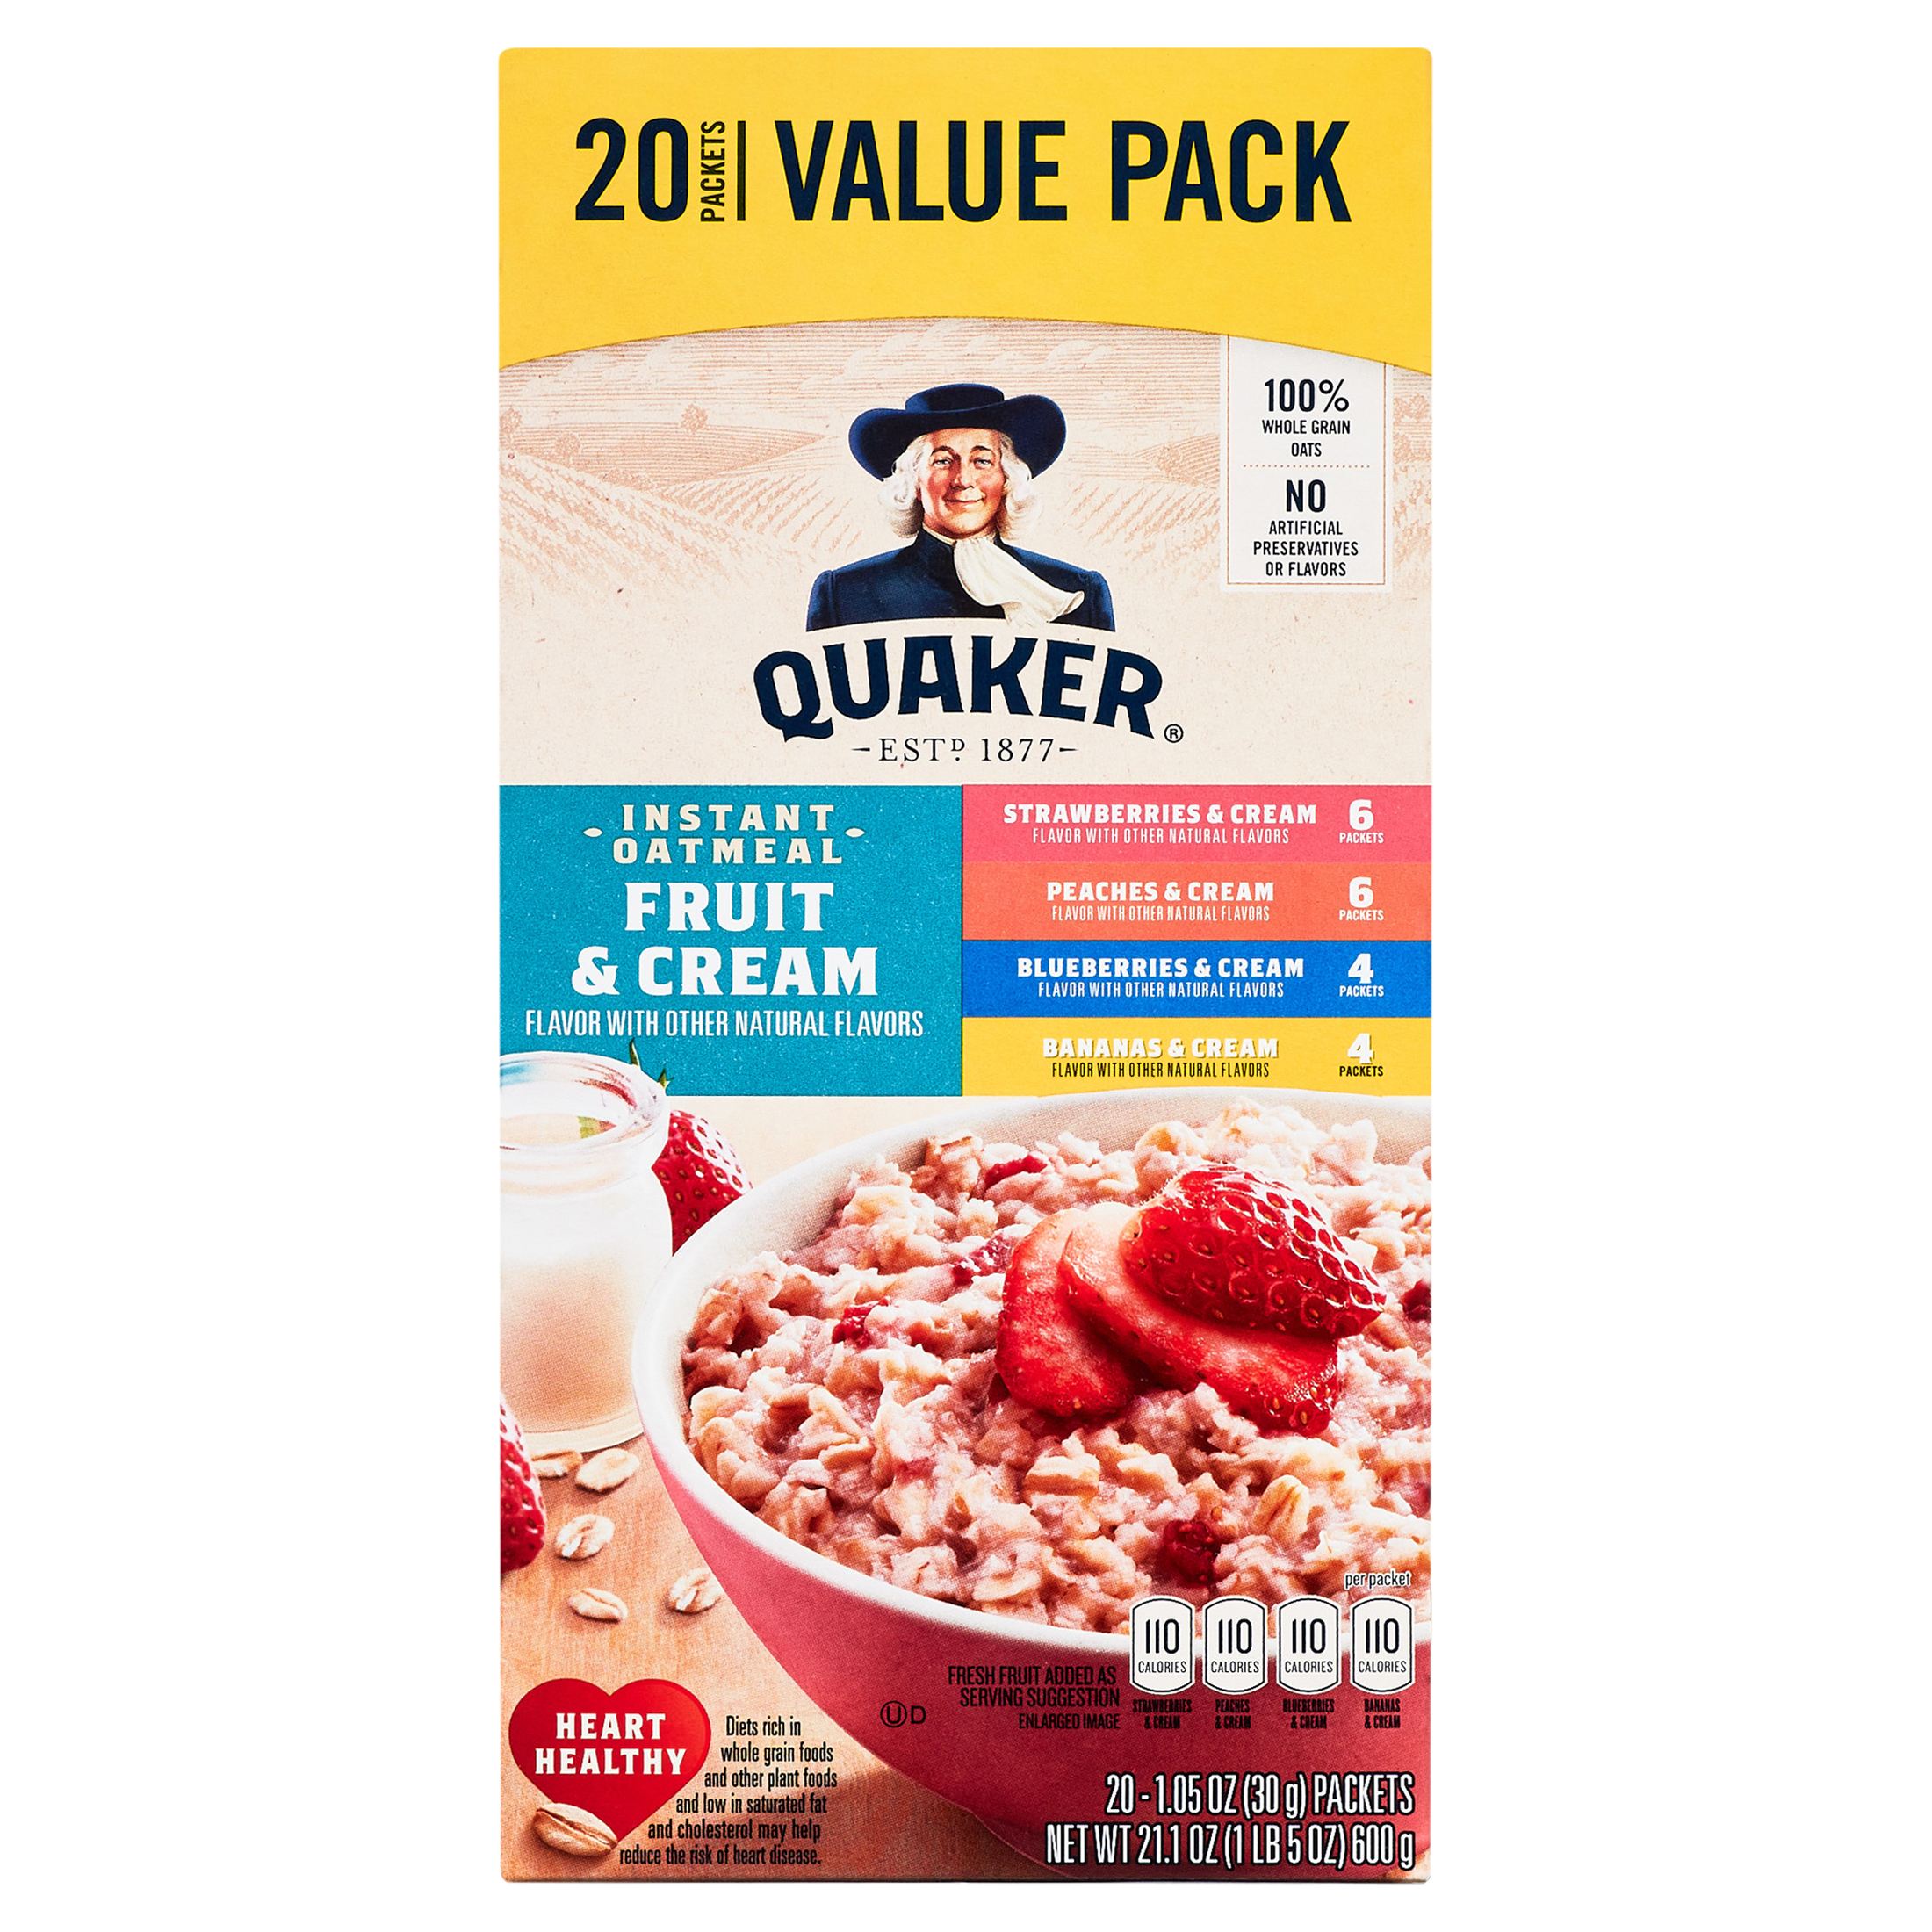 Quaker Instant Oatmeal, Fruit & Cream Variety Pack, Quick Cook Oatmeal, 1.1 oz Packets, 20 Pack - image 5 of 12